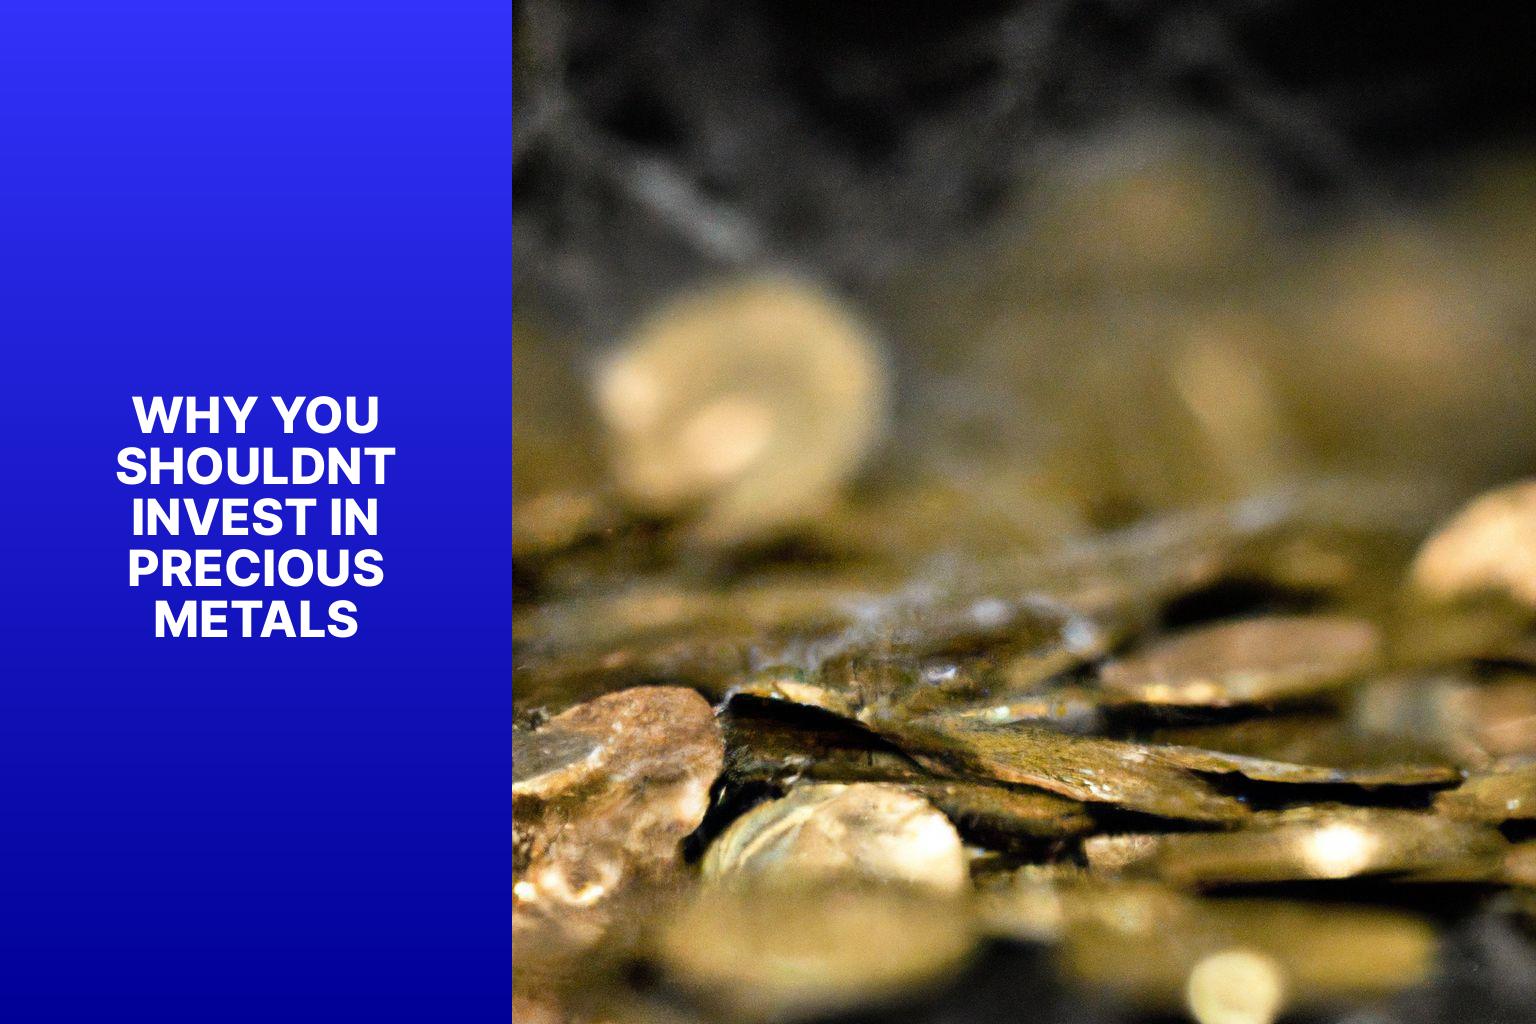 Why You ShouldnT Invest In Precious Metals